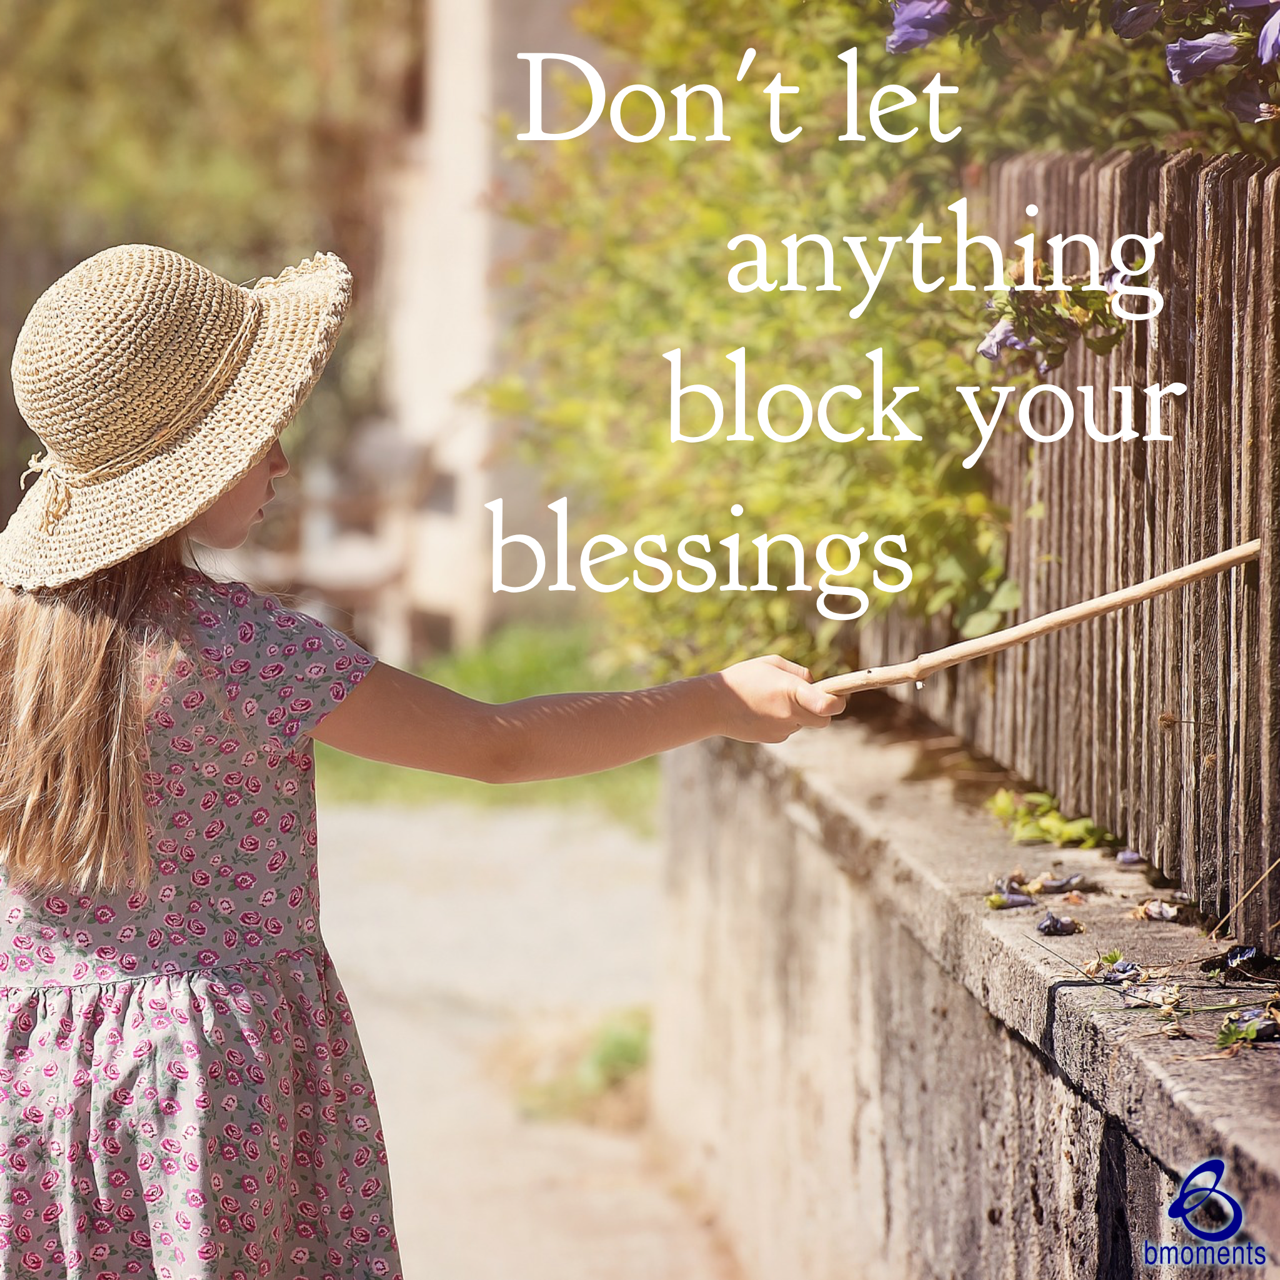 Are You Blocking Your Own Blessings?